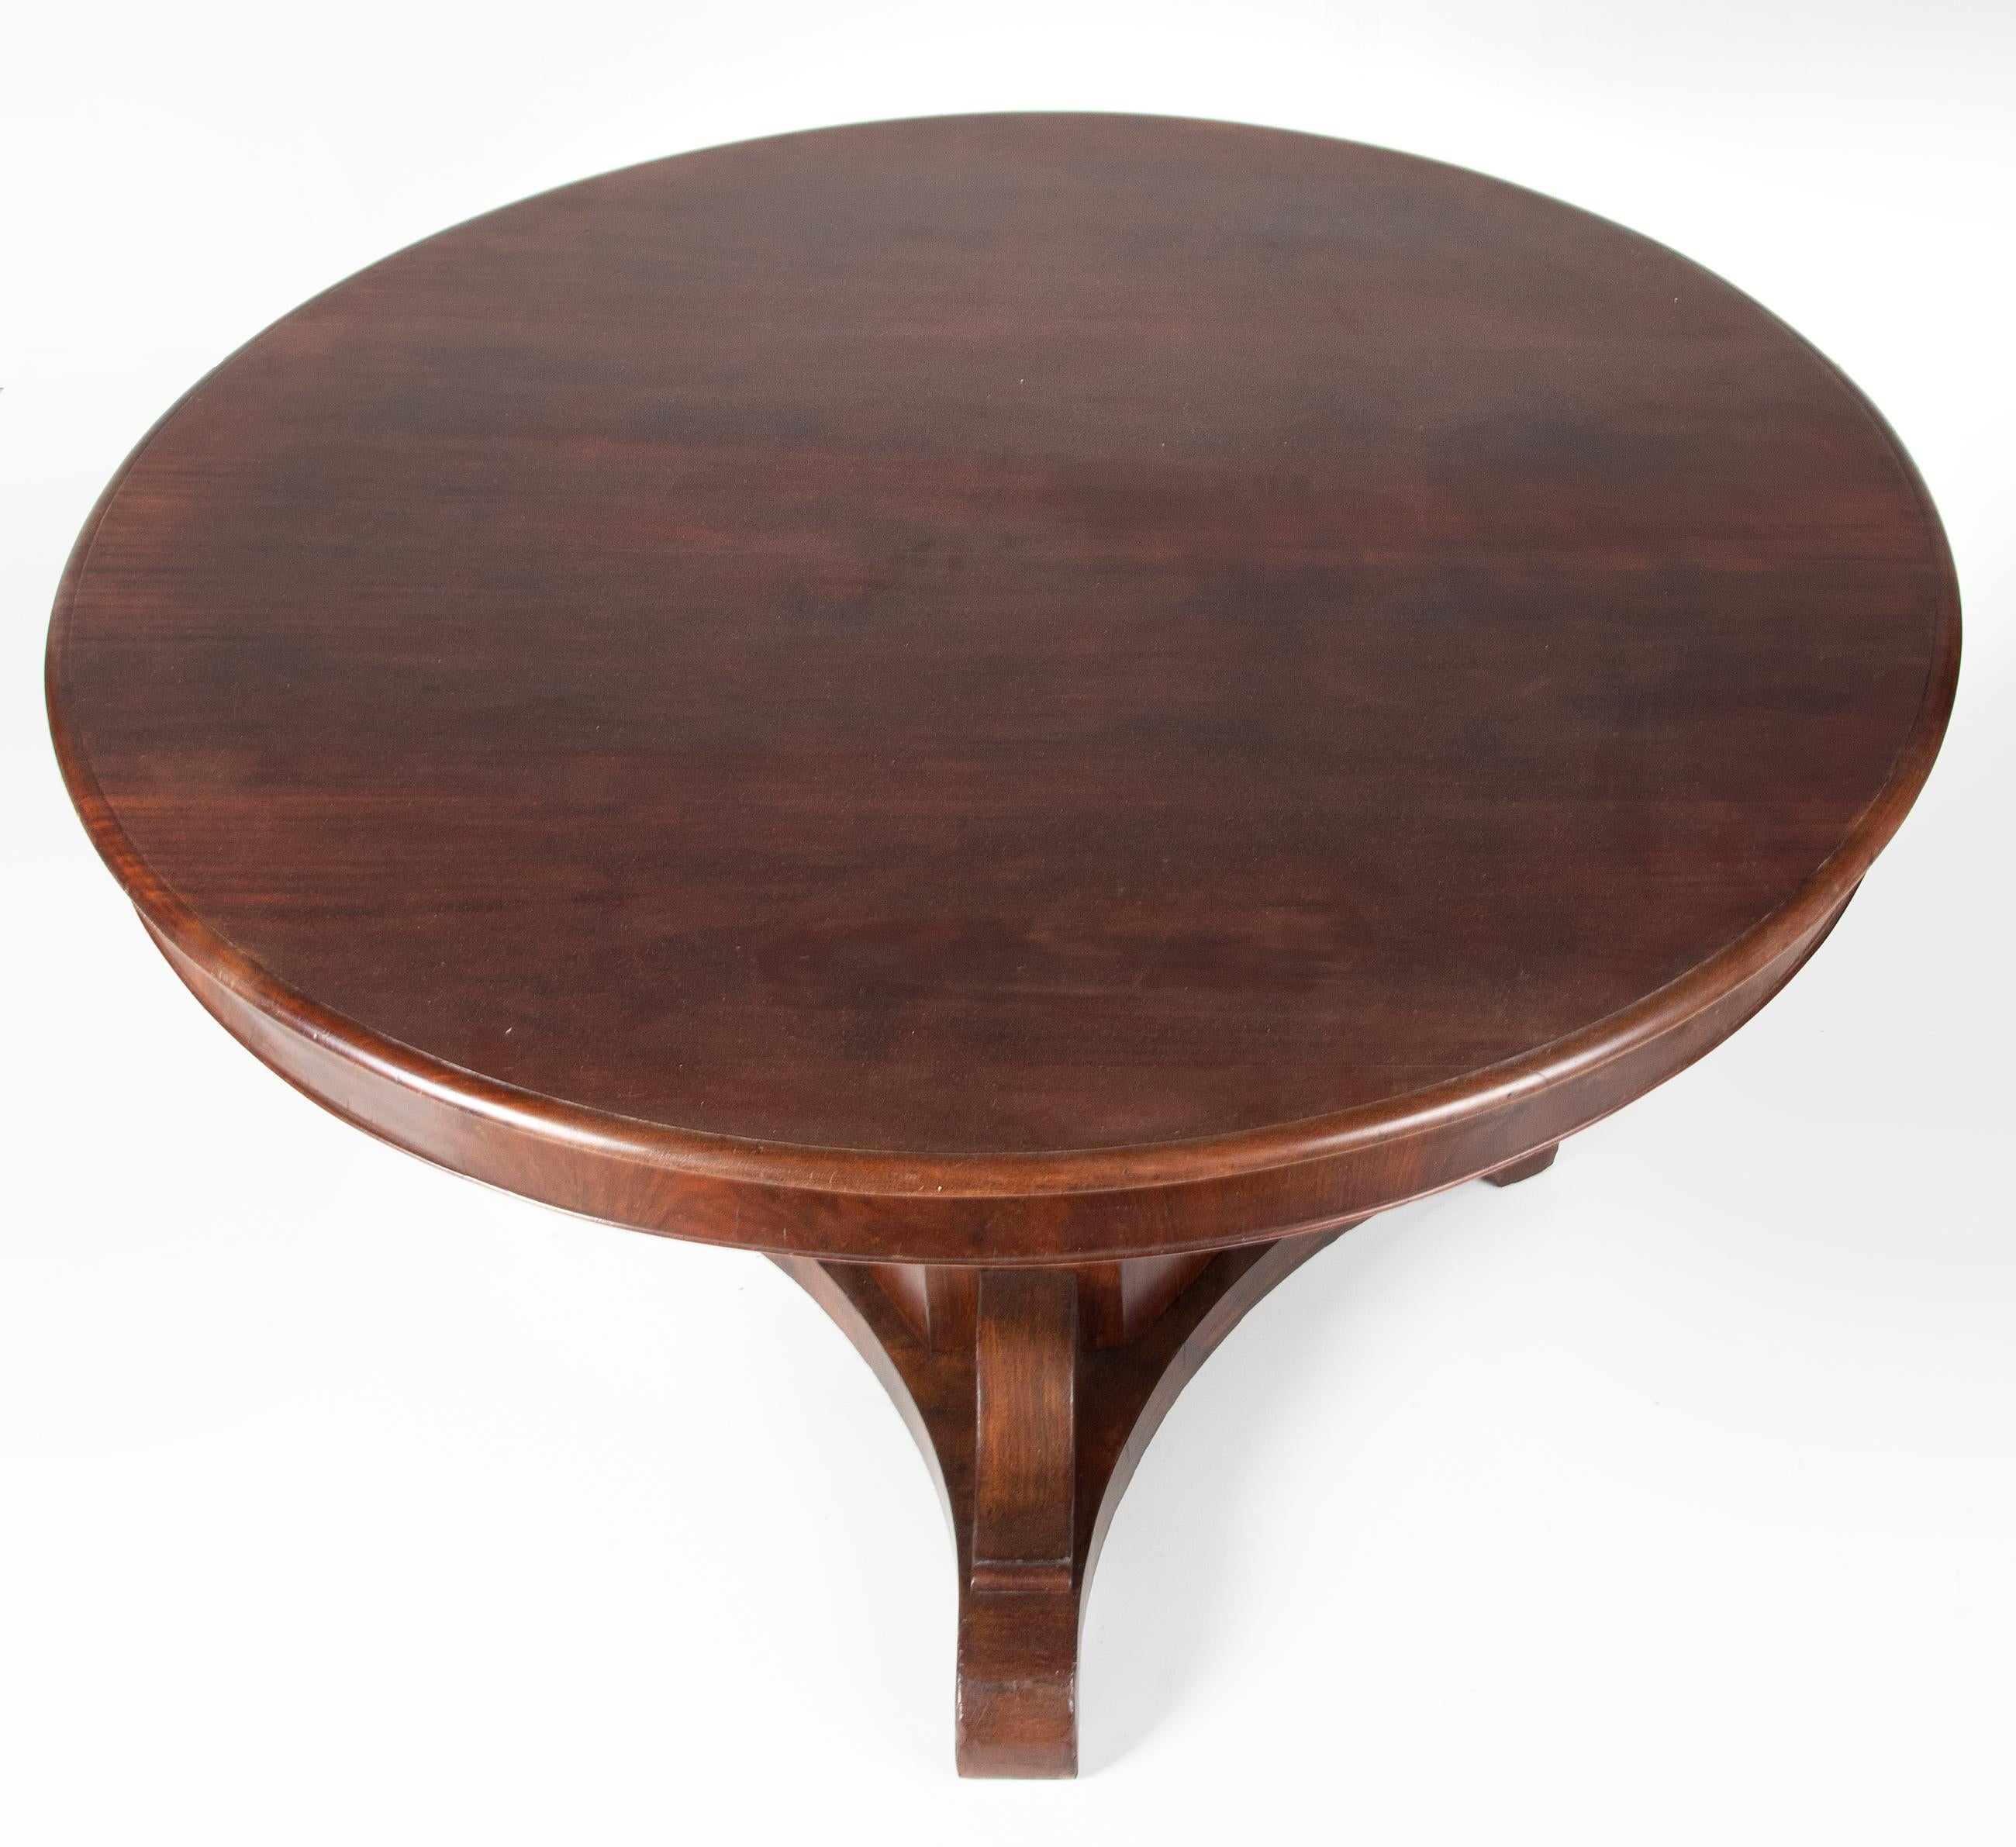 19th Century French Louis Philippe Round Dining Room Table Mahogany Veneered In Good Condition For Sale In Casteren, Noord-Brabant